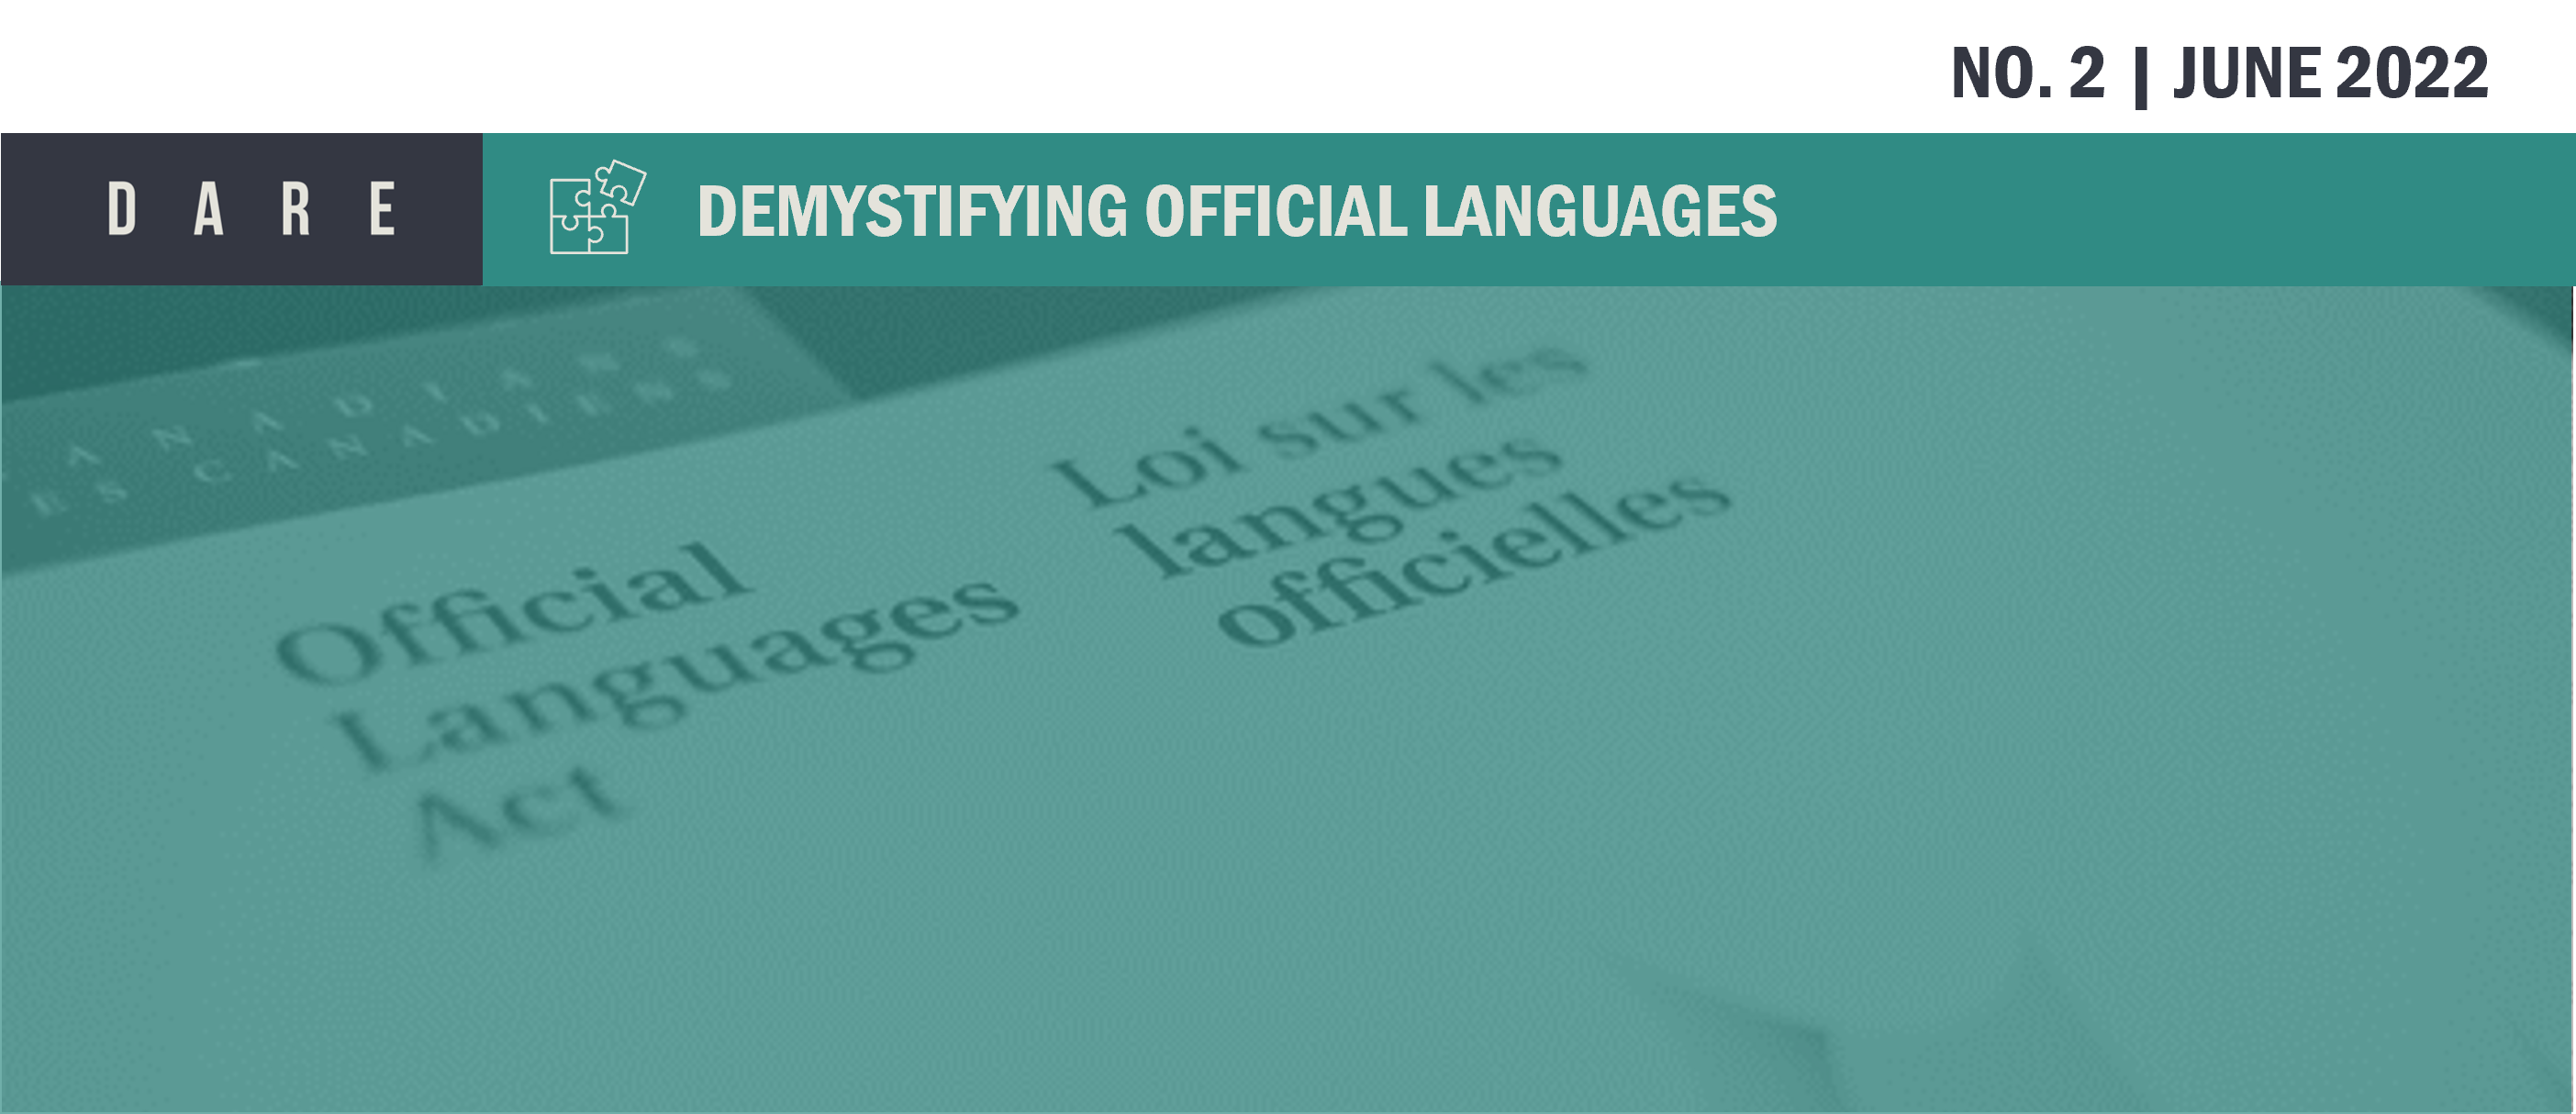 Alt=Image of the Official Languages Act. Demystifying Official Languages. Dare Newsletter, no 2, June 2022.